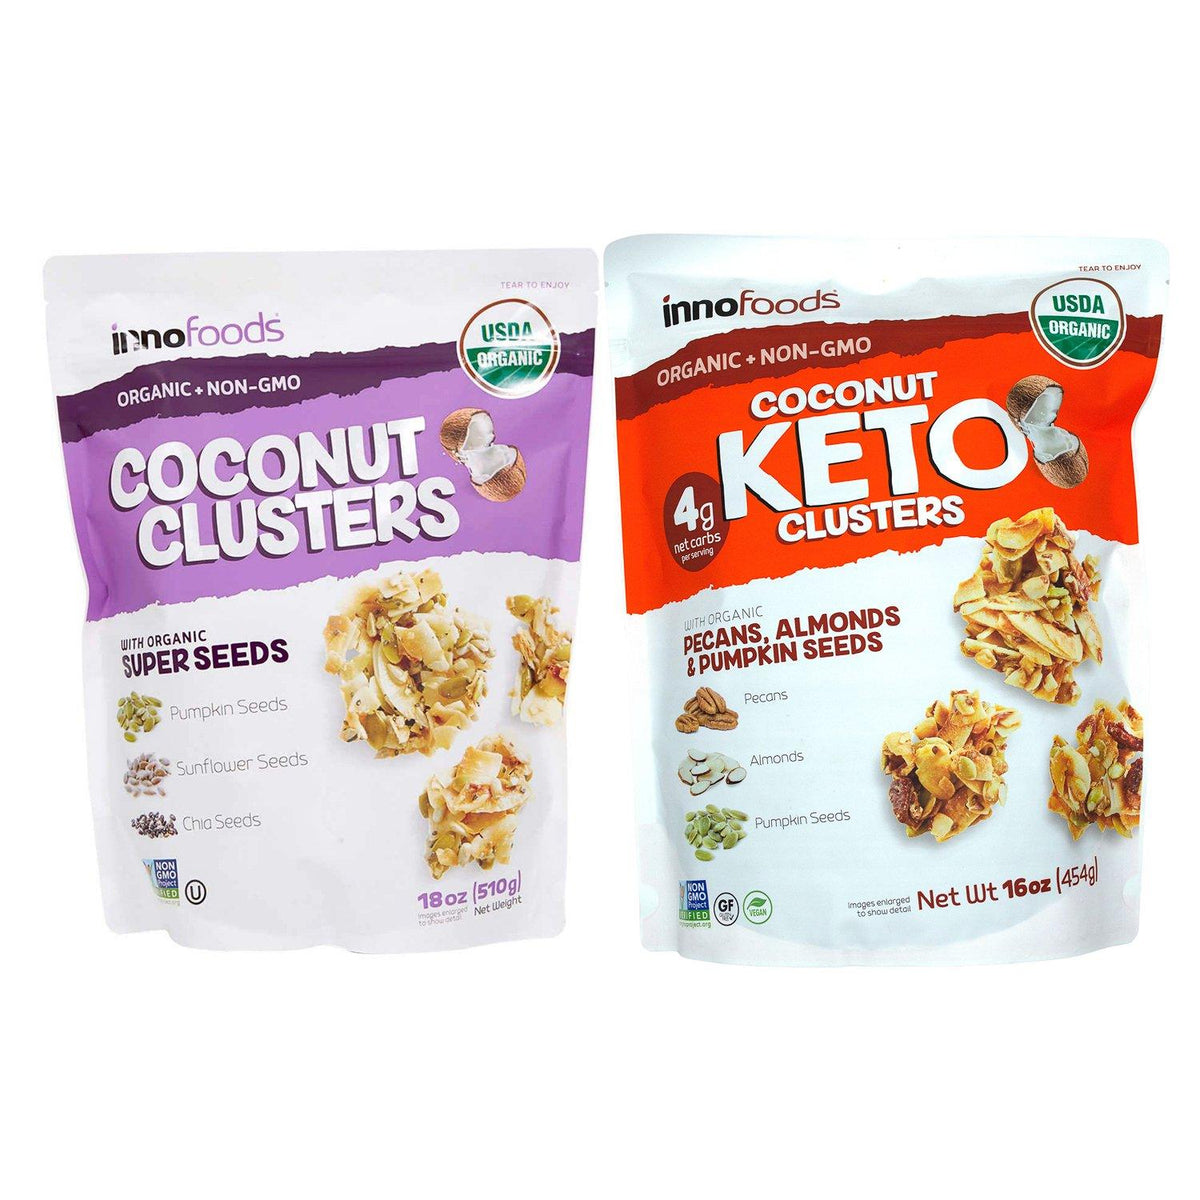 innofoods coconut keto clusters